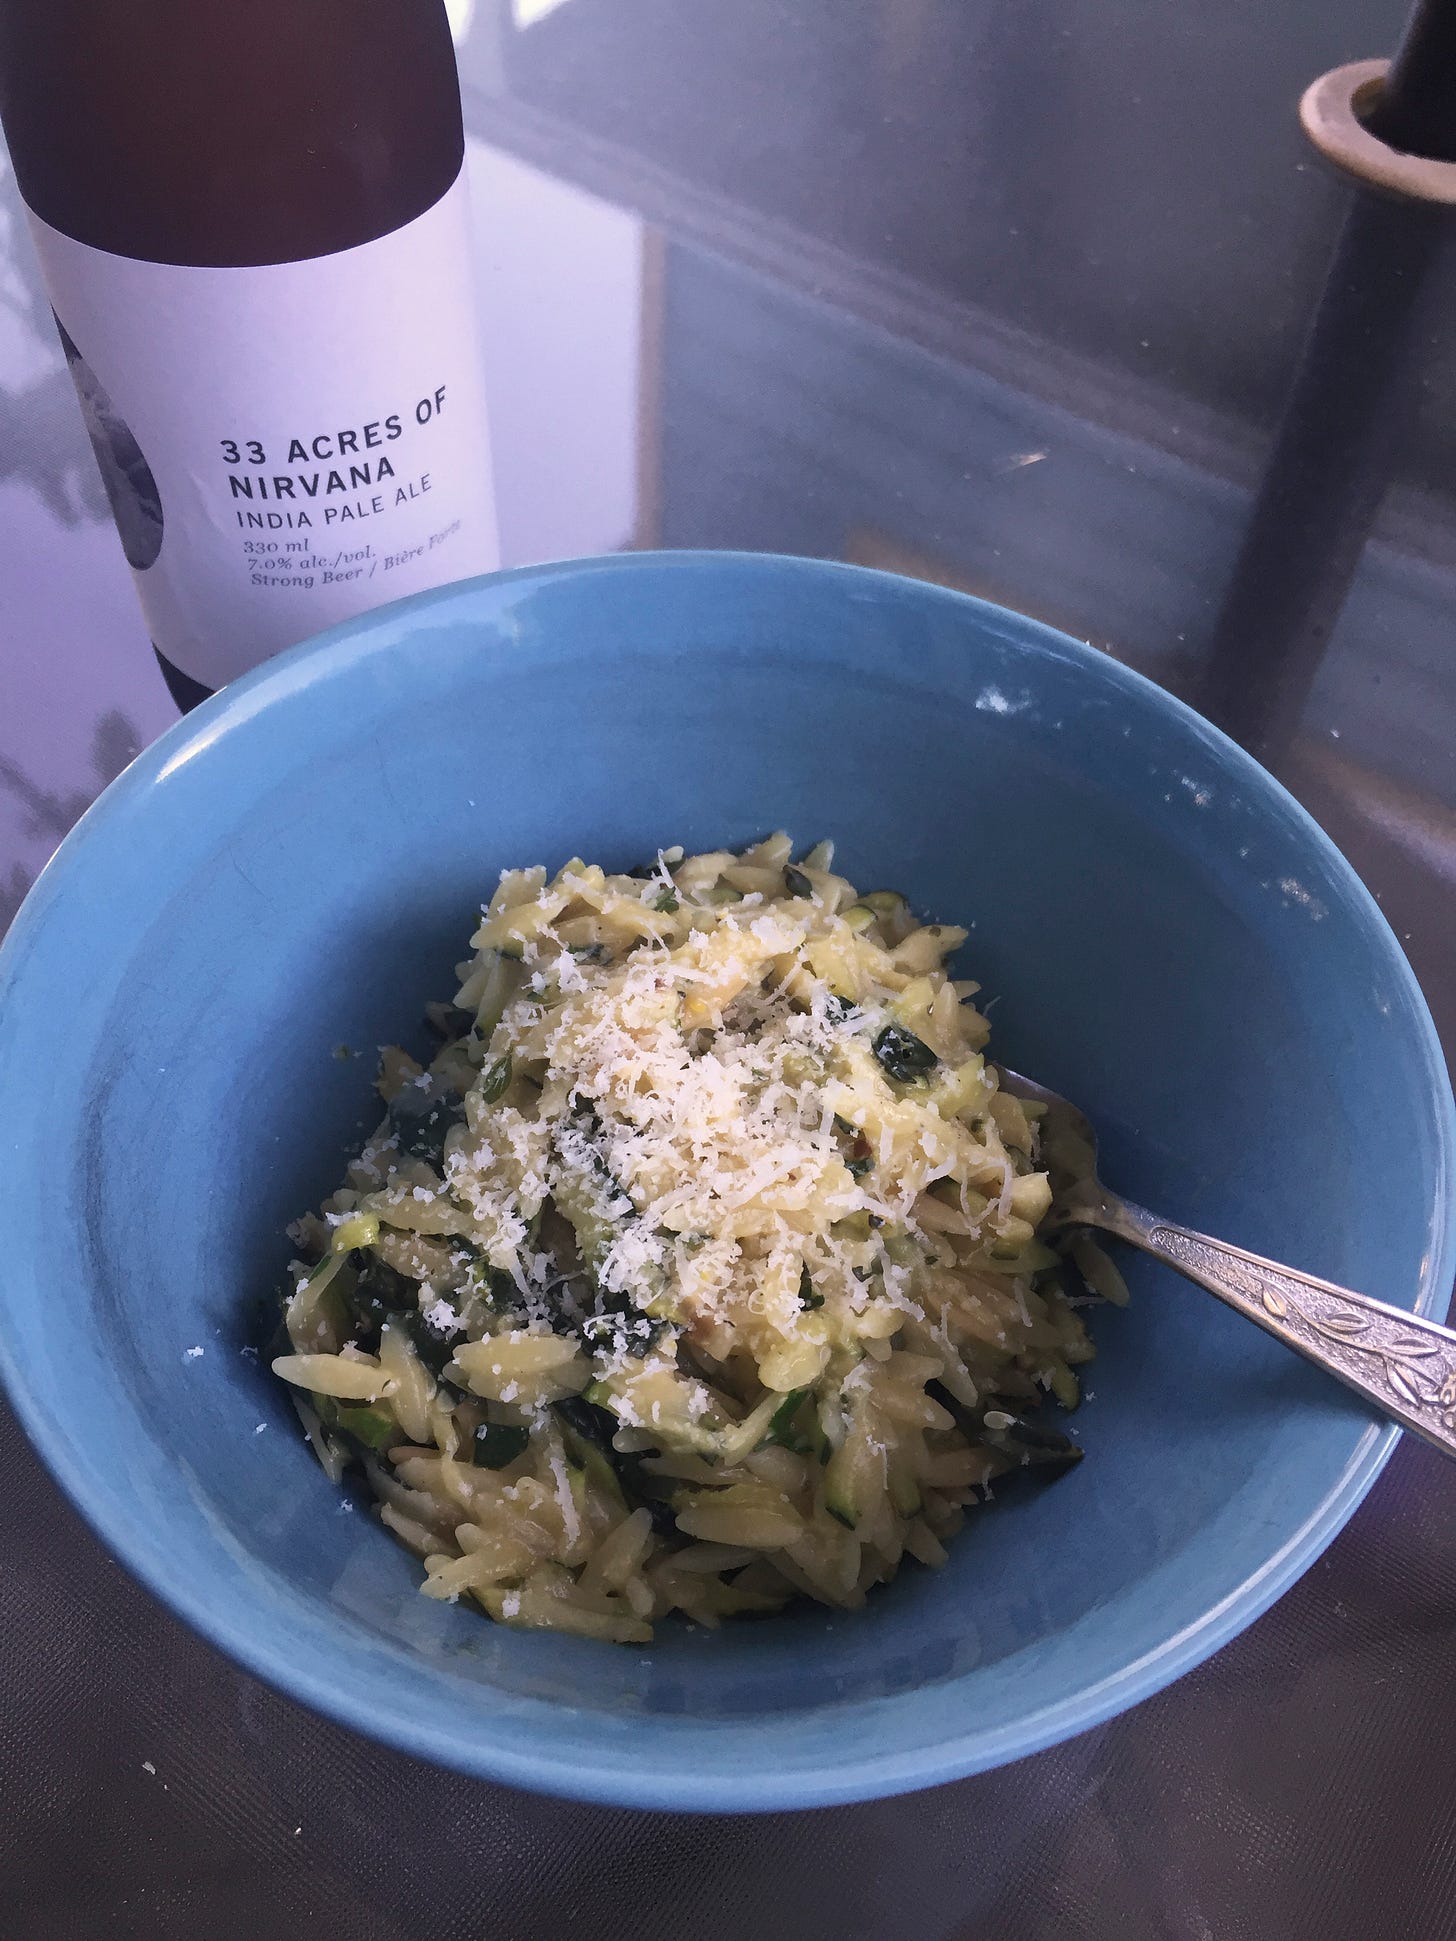 A blue bowl full of orzo, with shreds of pecorino on top and kale and zucchini visible throughout. Next to the bowl is a bottle of 33 Acres of Nirvana IPA.